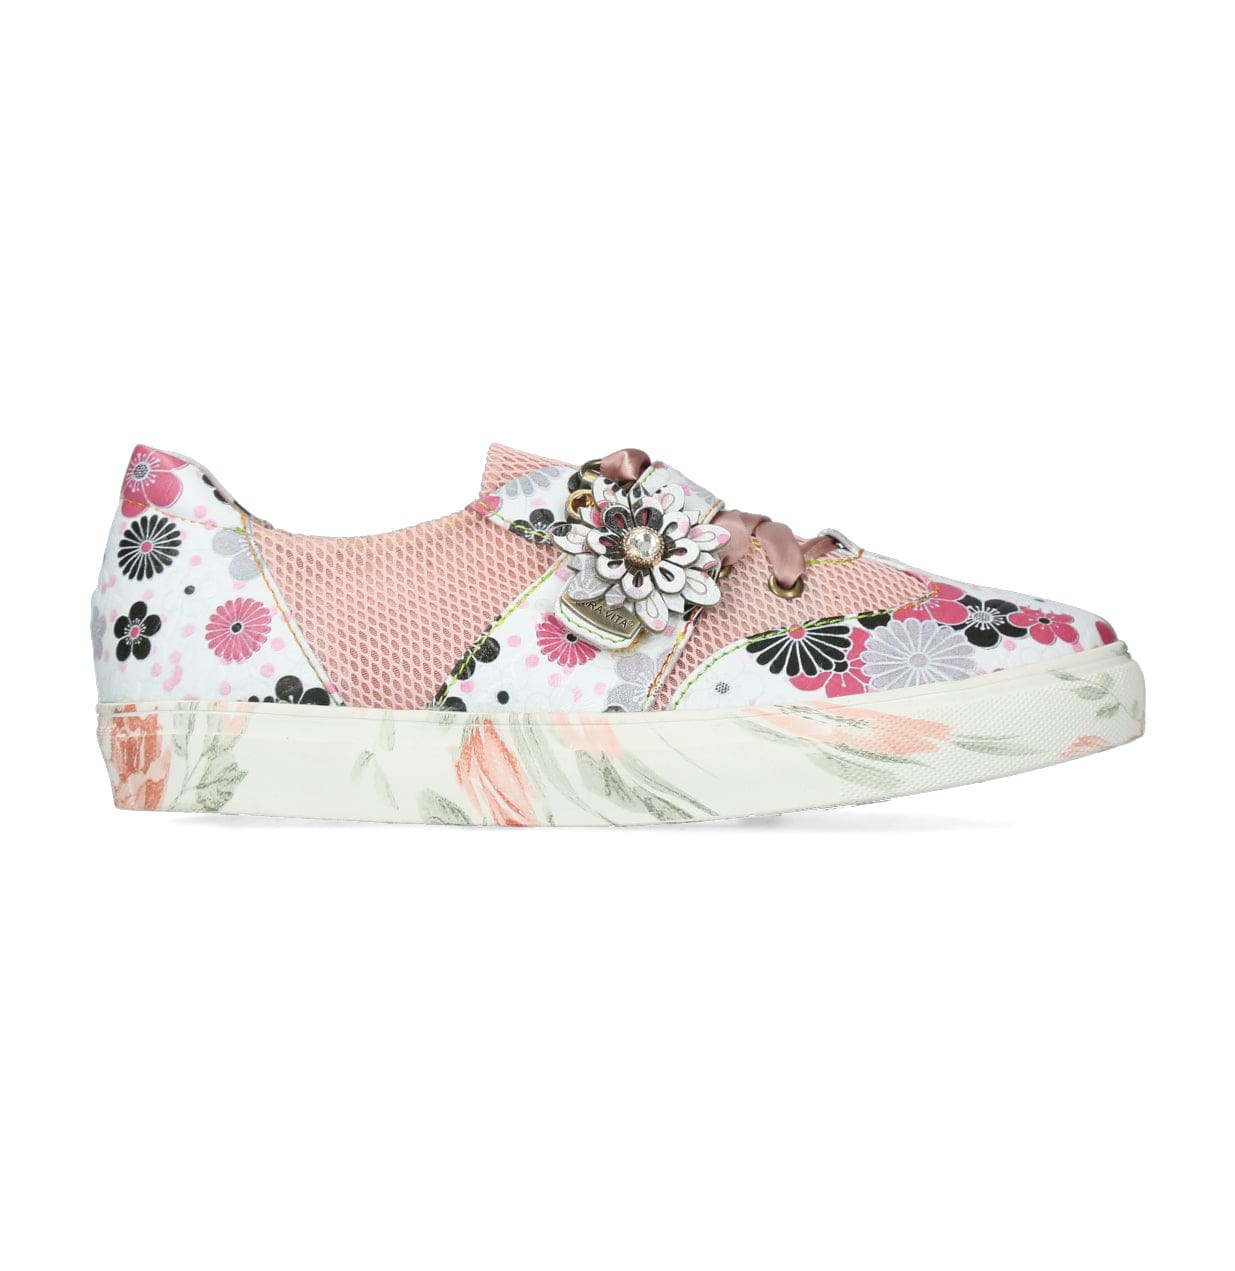 Chaussures HACKO 0322 - 35 / Rose - Sport